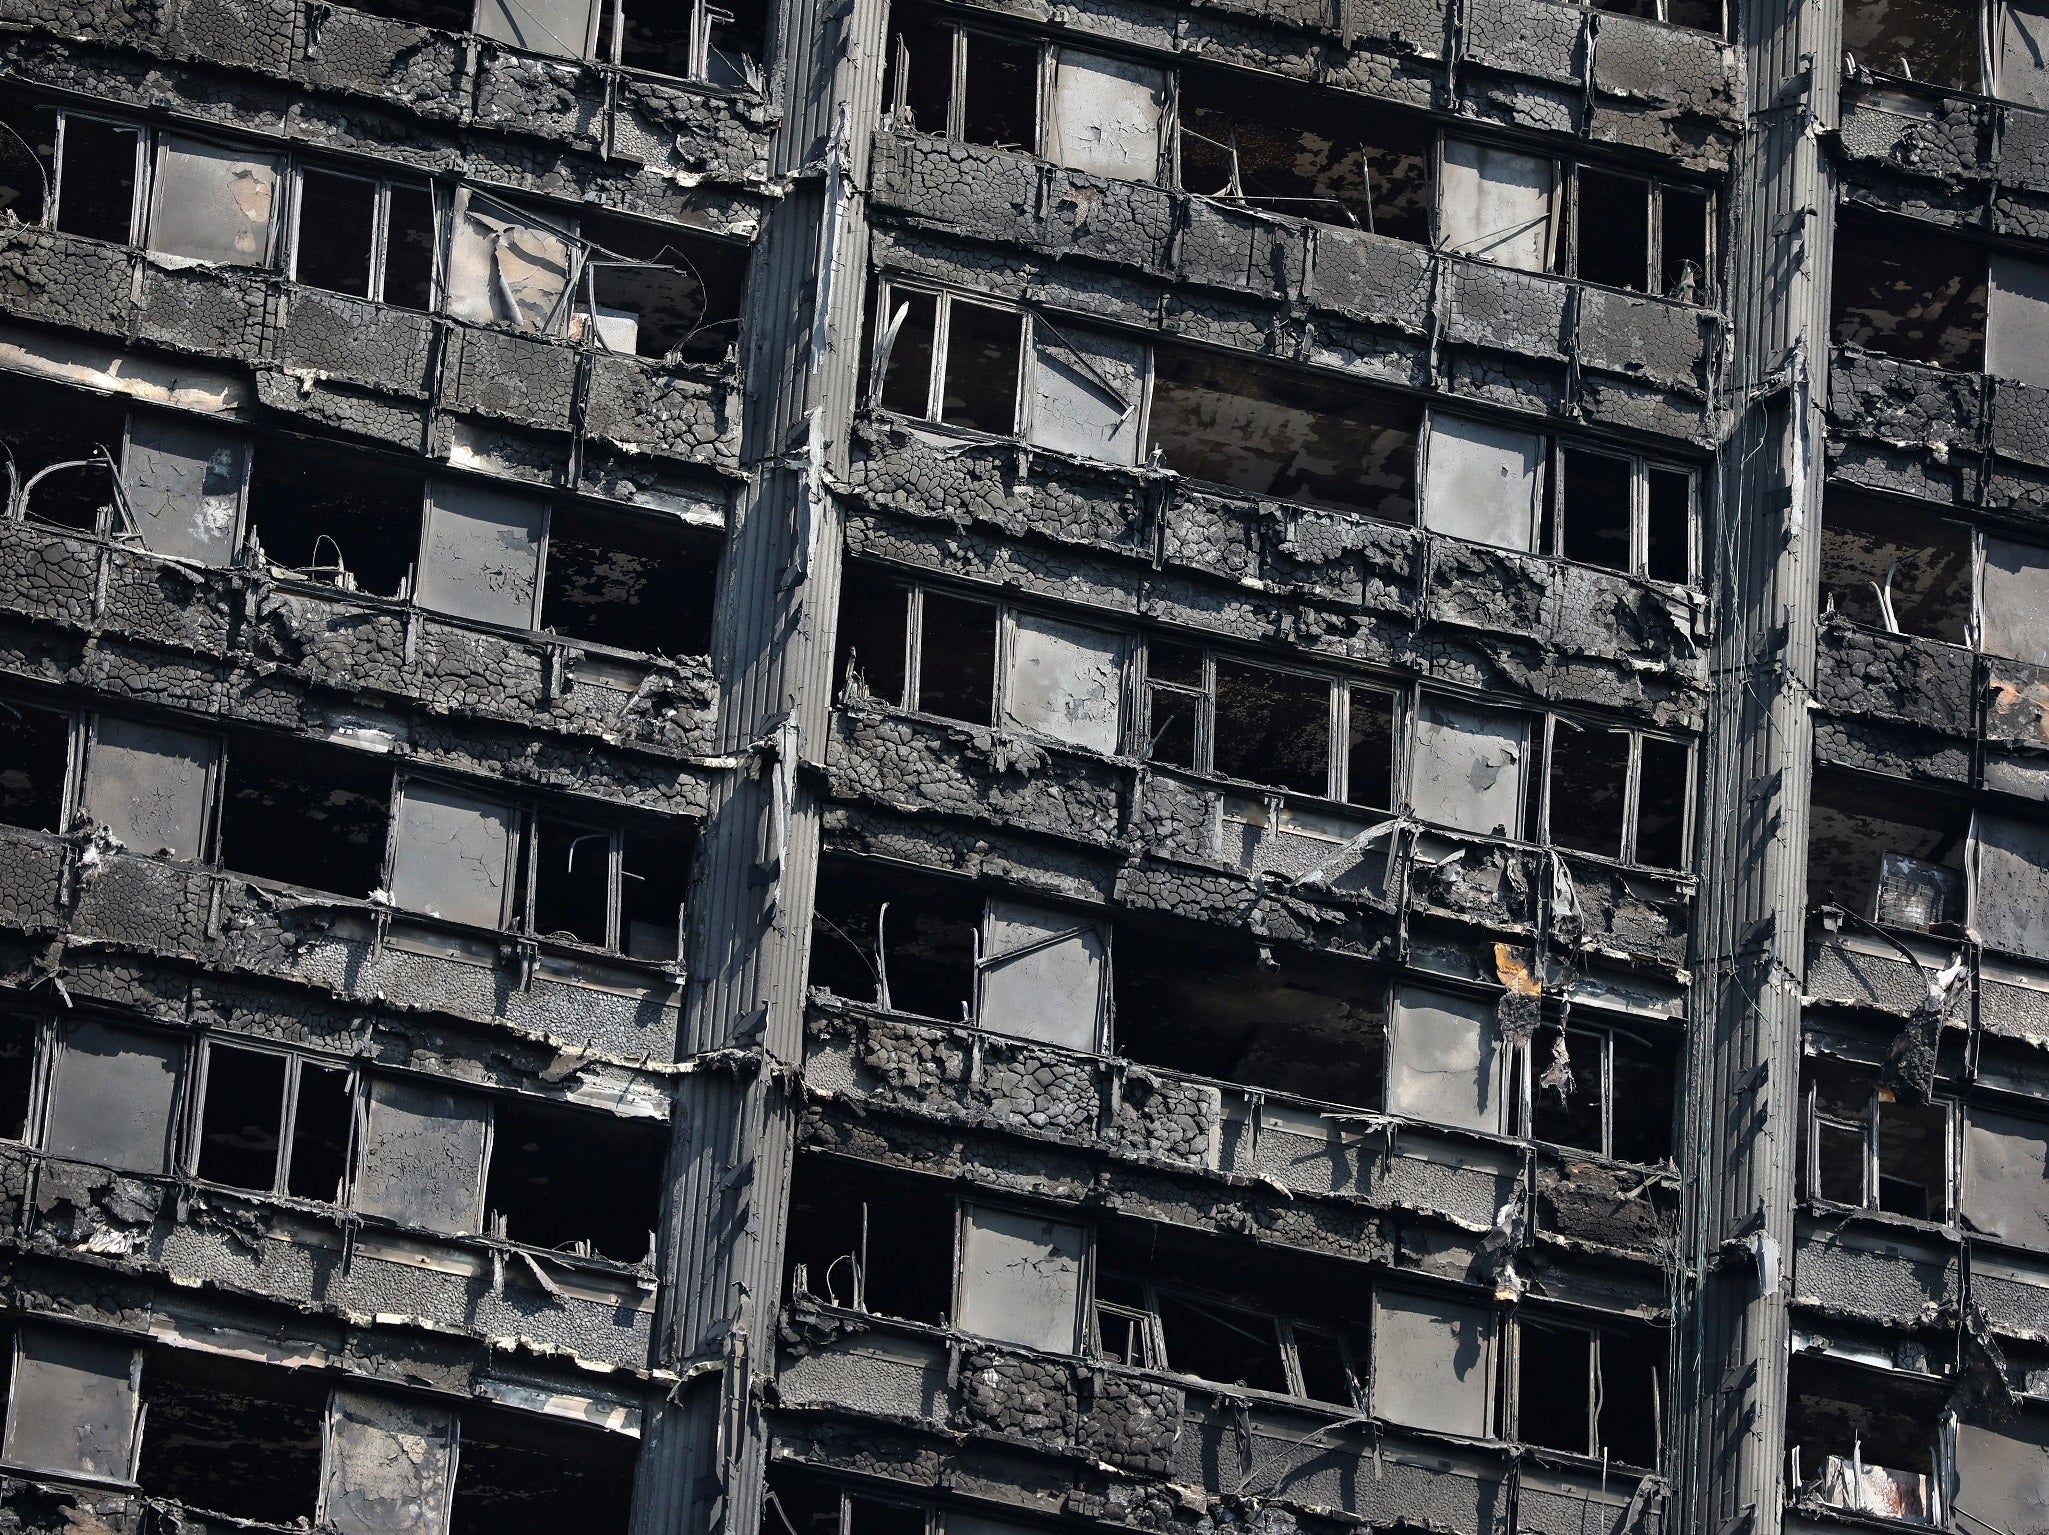 79 people have so far been confirmed dead in the Grenfell Tower fire